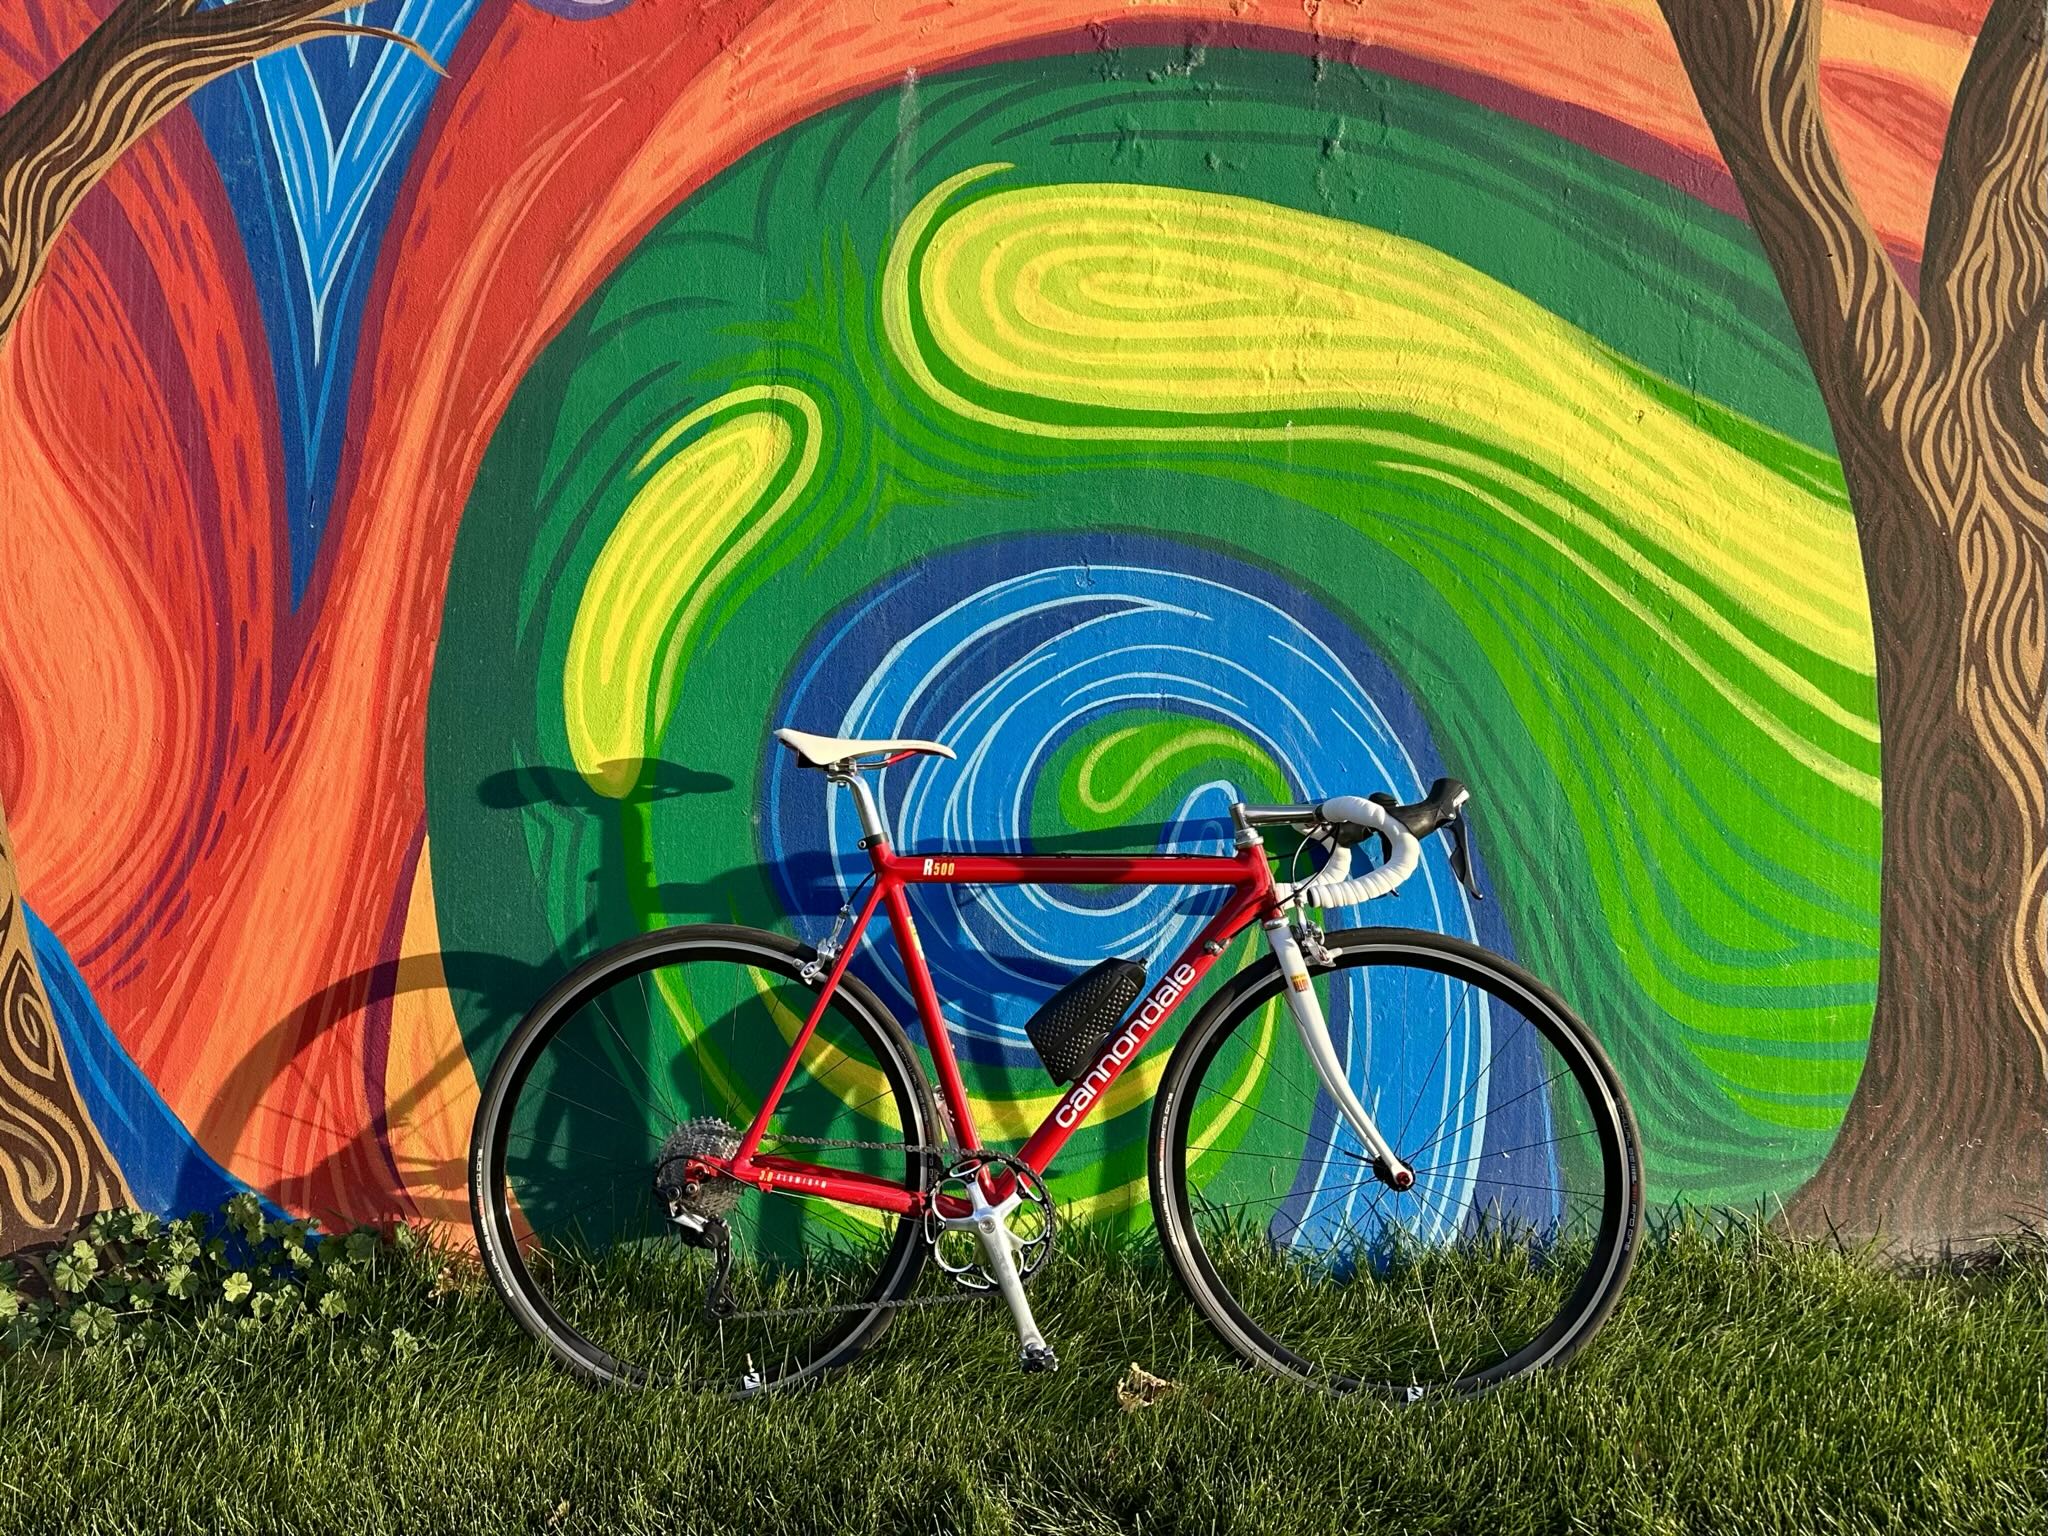 My Cannondale R500 in front of a mural painted by Kristen Vohs in the Maple Hill neighborhood of Fort Collins.